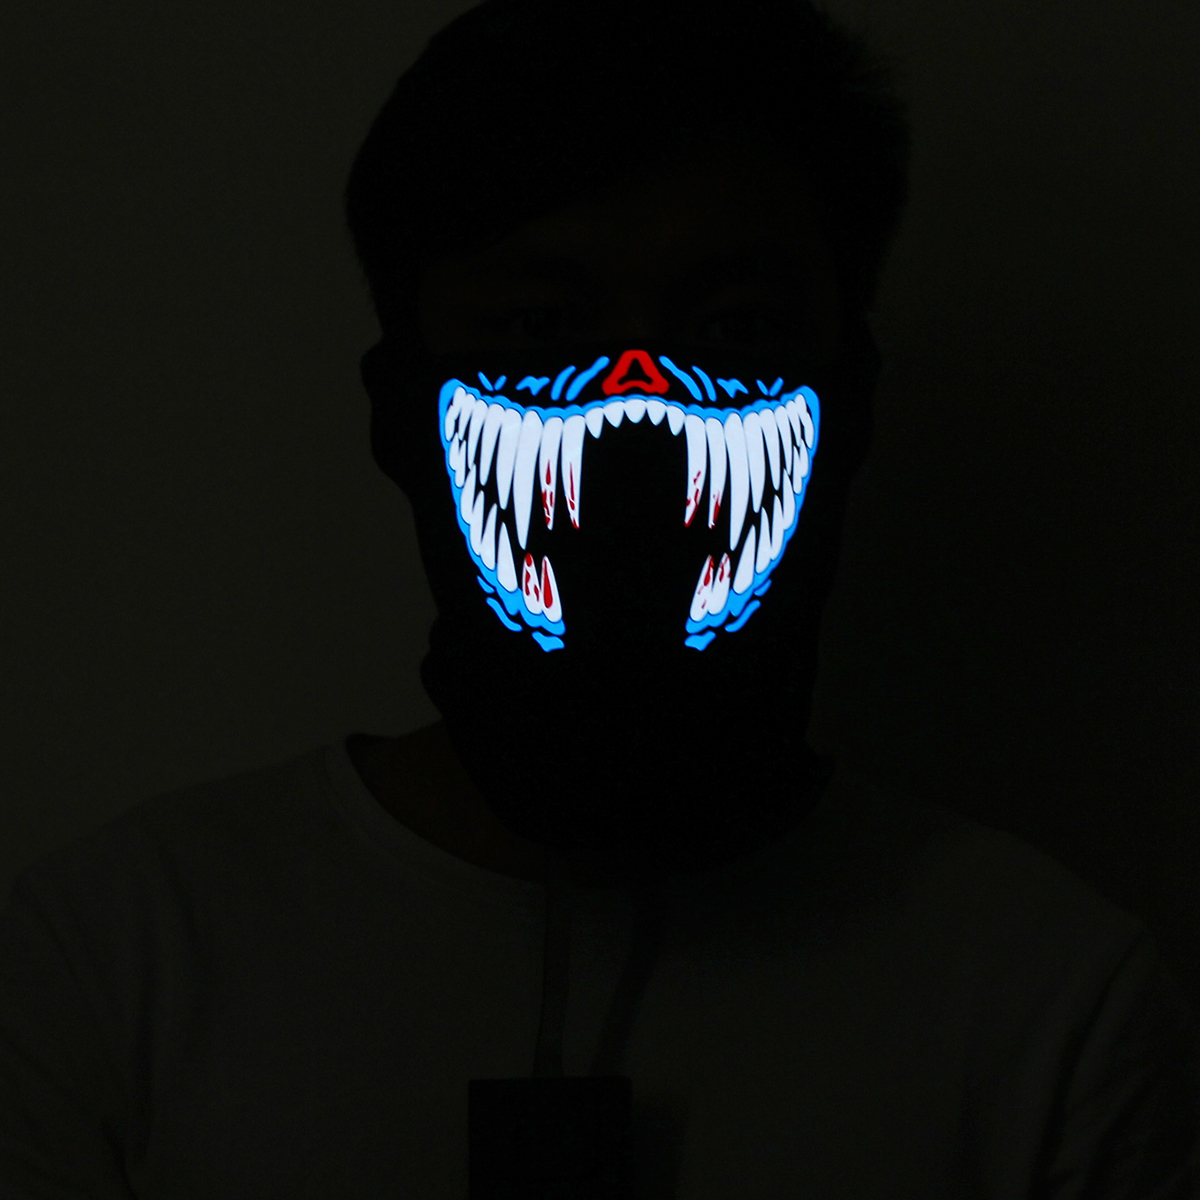 LED-Rave-Party-Face-Mask-Equalizer-Flashing-by-Music-Luminous-Cosplay-Dance-1332768-2